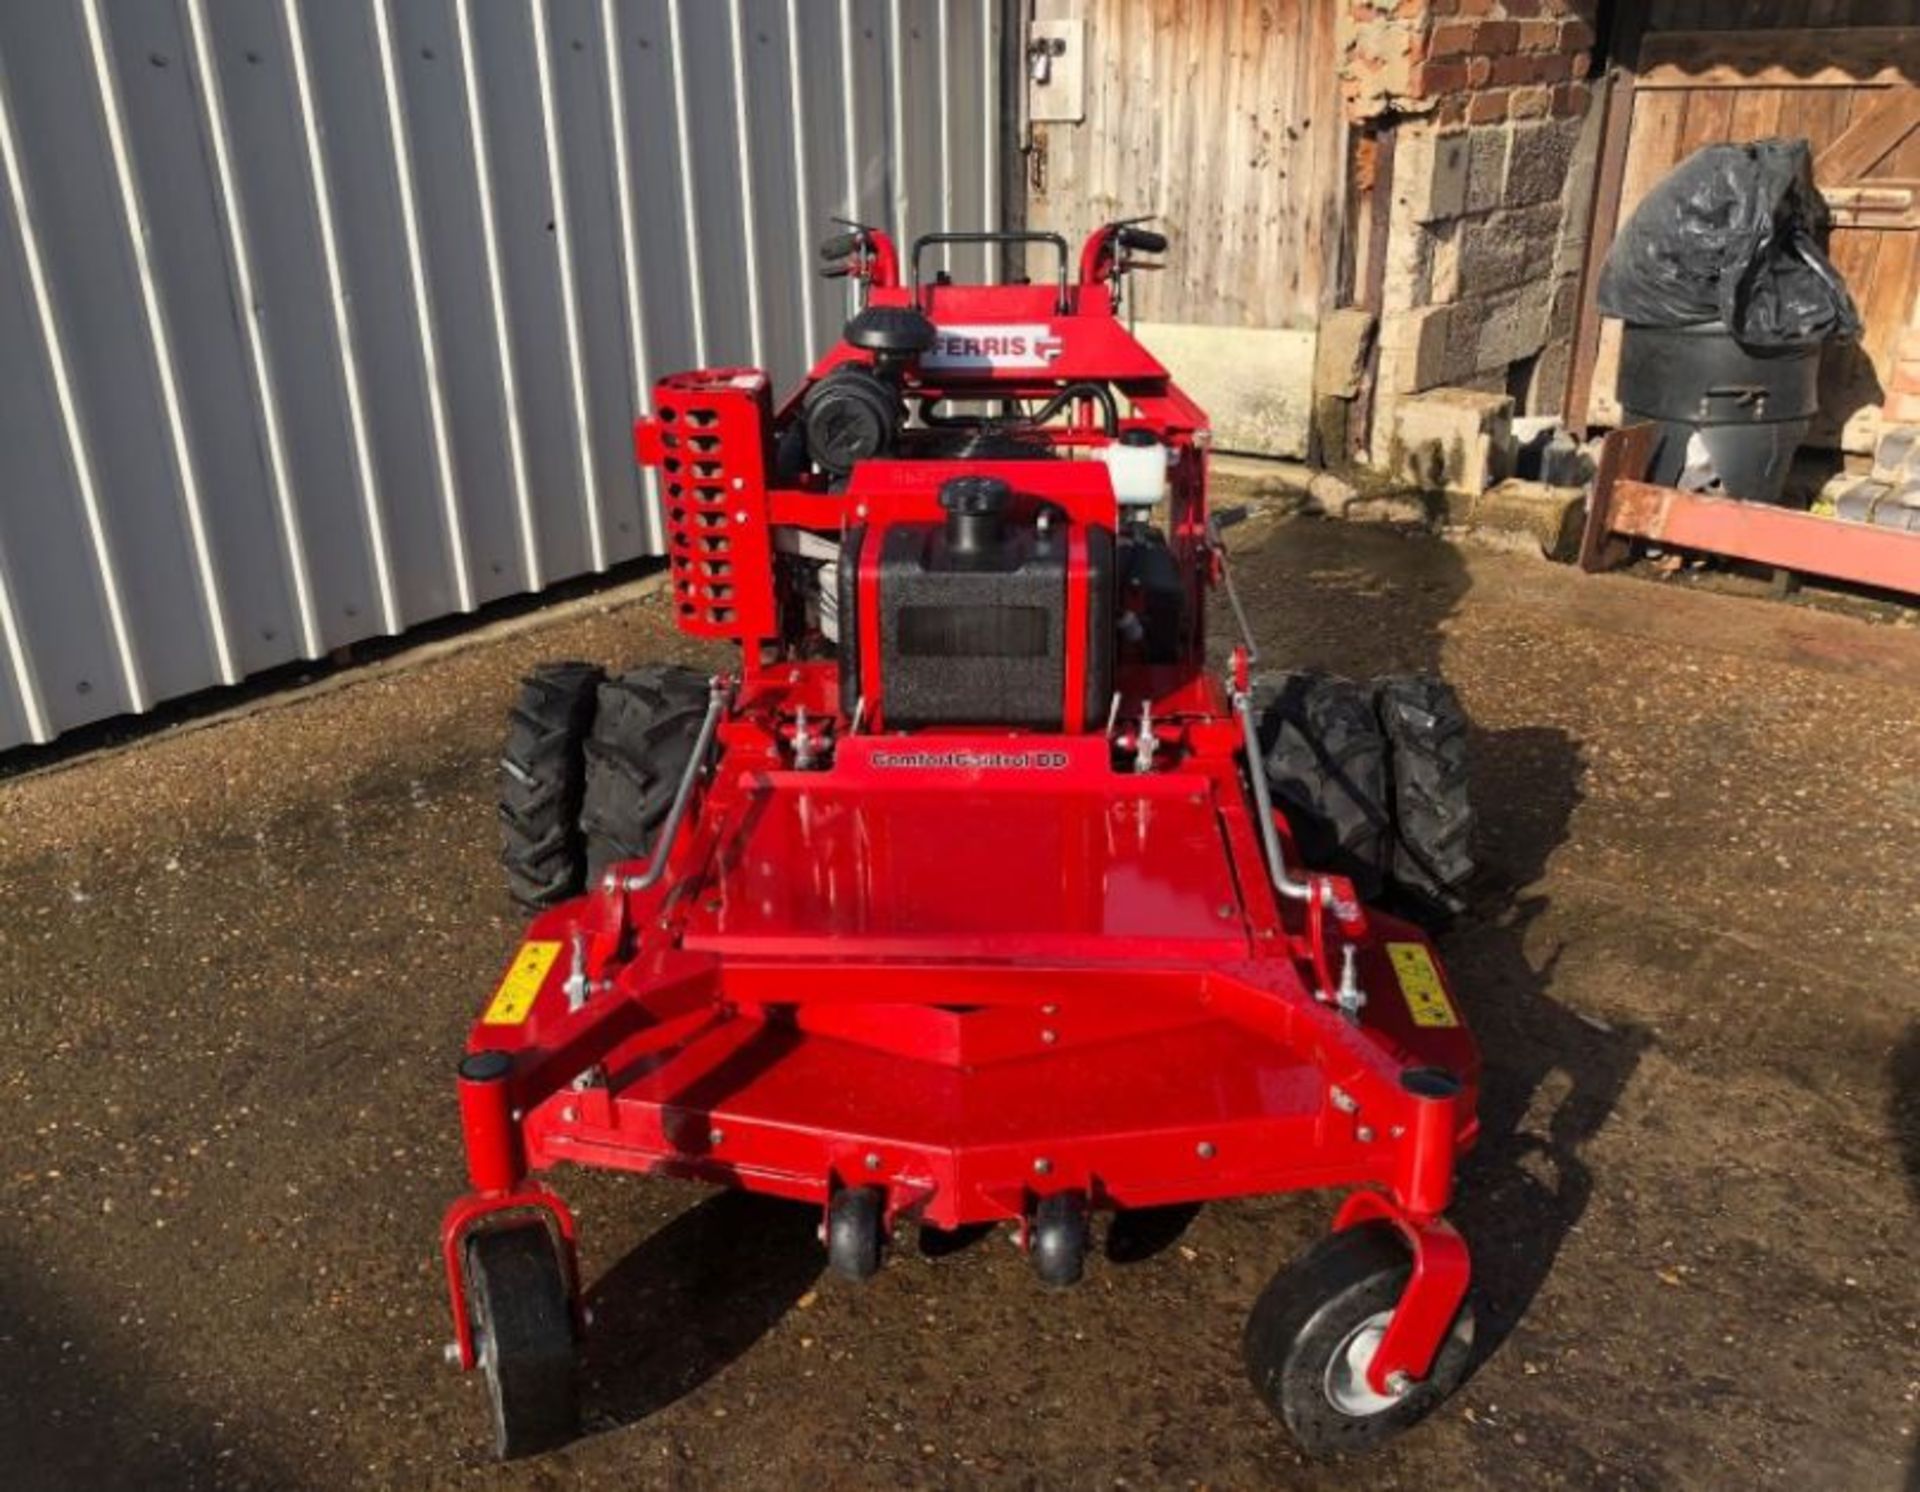 FERRIS 48" CUT DUAL HYDRO DRIVE BANK MOWER, IMMACULATE CONDITION, ZERO TURN *PLUS VAT* - Image 6 of 6